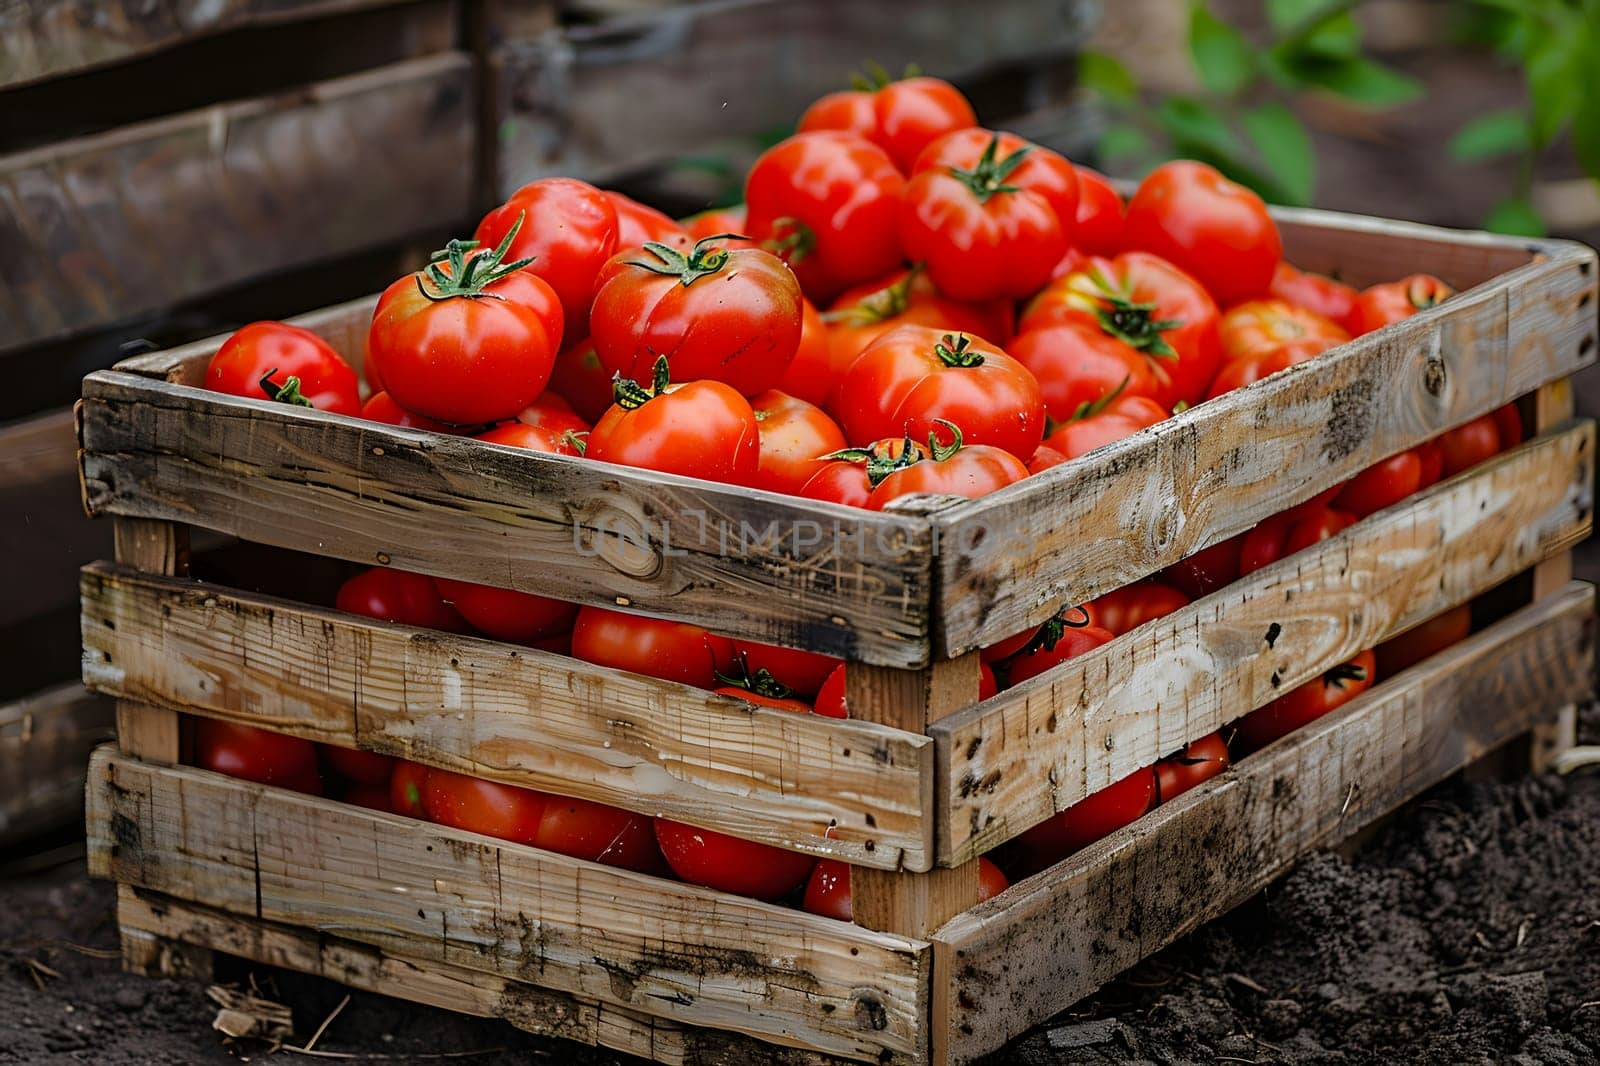 A crate filled with ripe plum tomatoes, a natural food ingredient, is resting on the ground, showcasing the fresh produce of whole food and vegetables